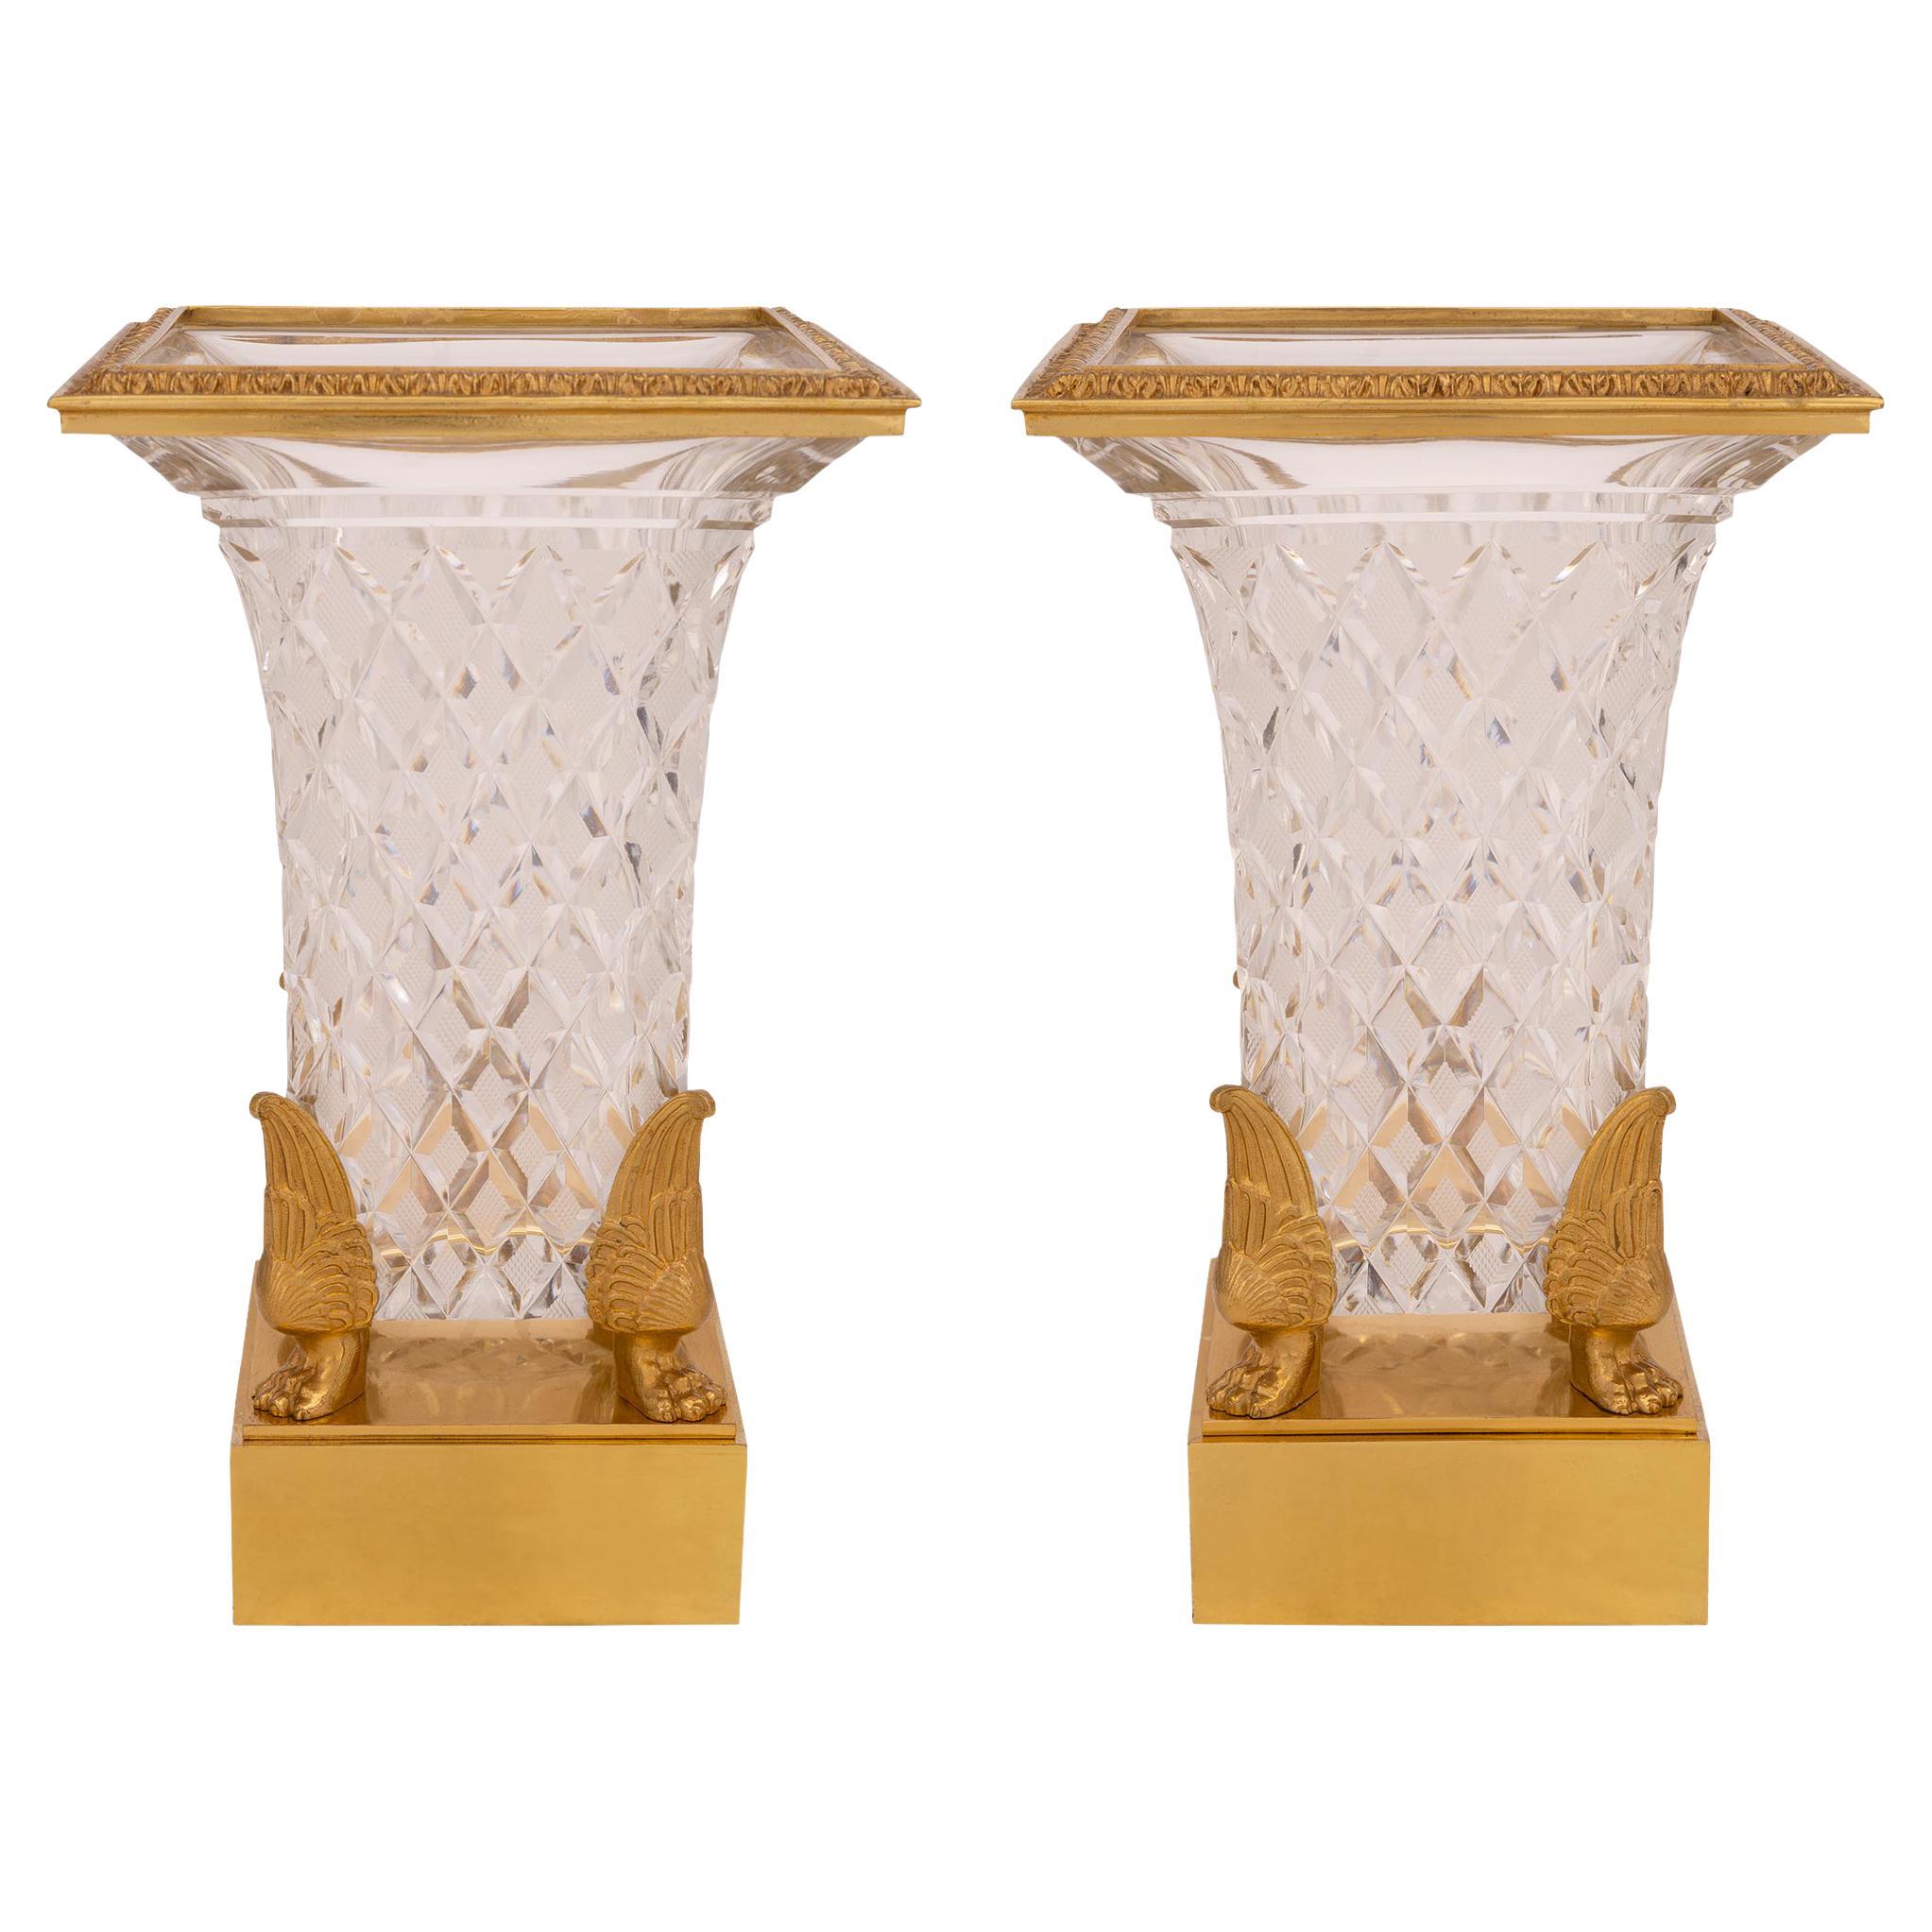 Pair of 19th Century Neoclassical Style Baccarat Crystal and Ormolu Vases For Sale